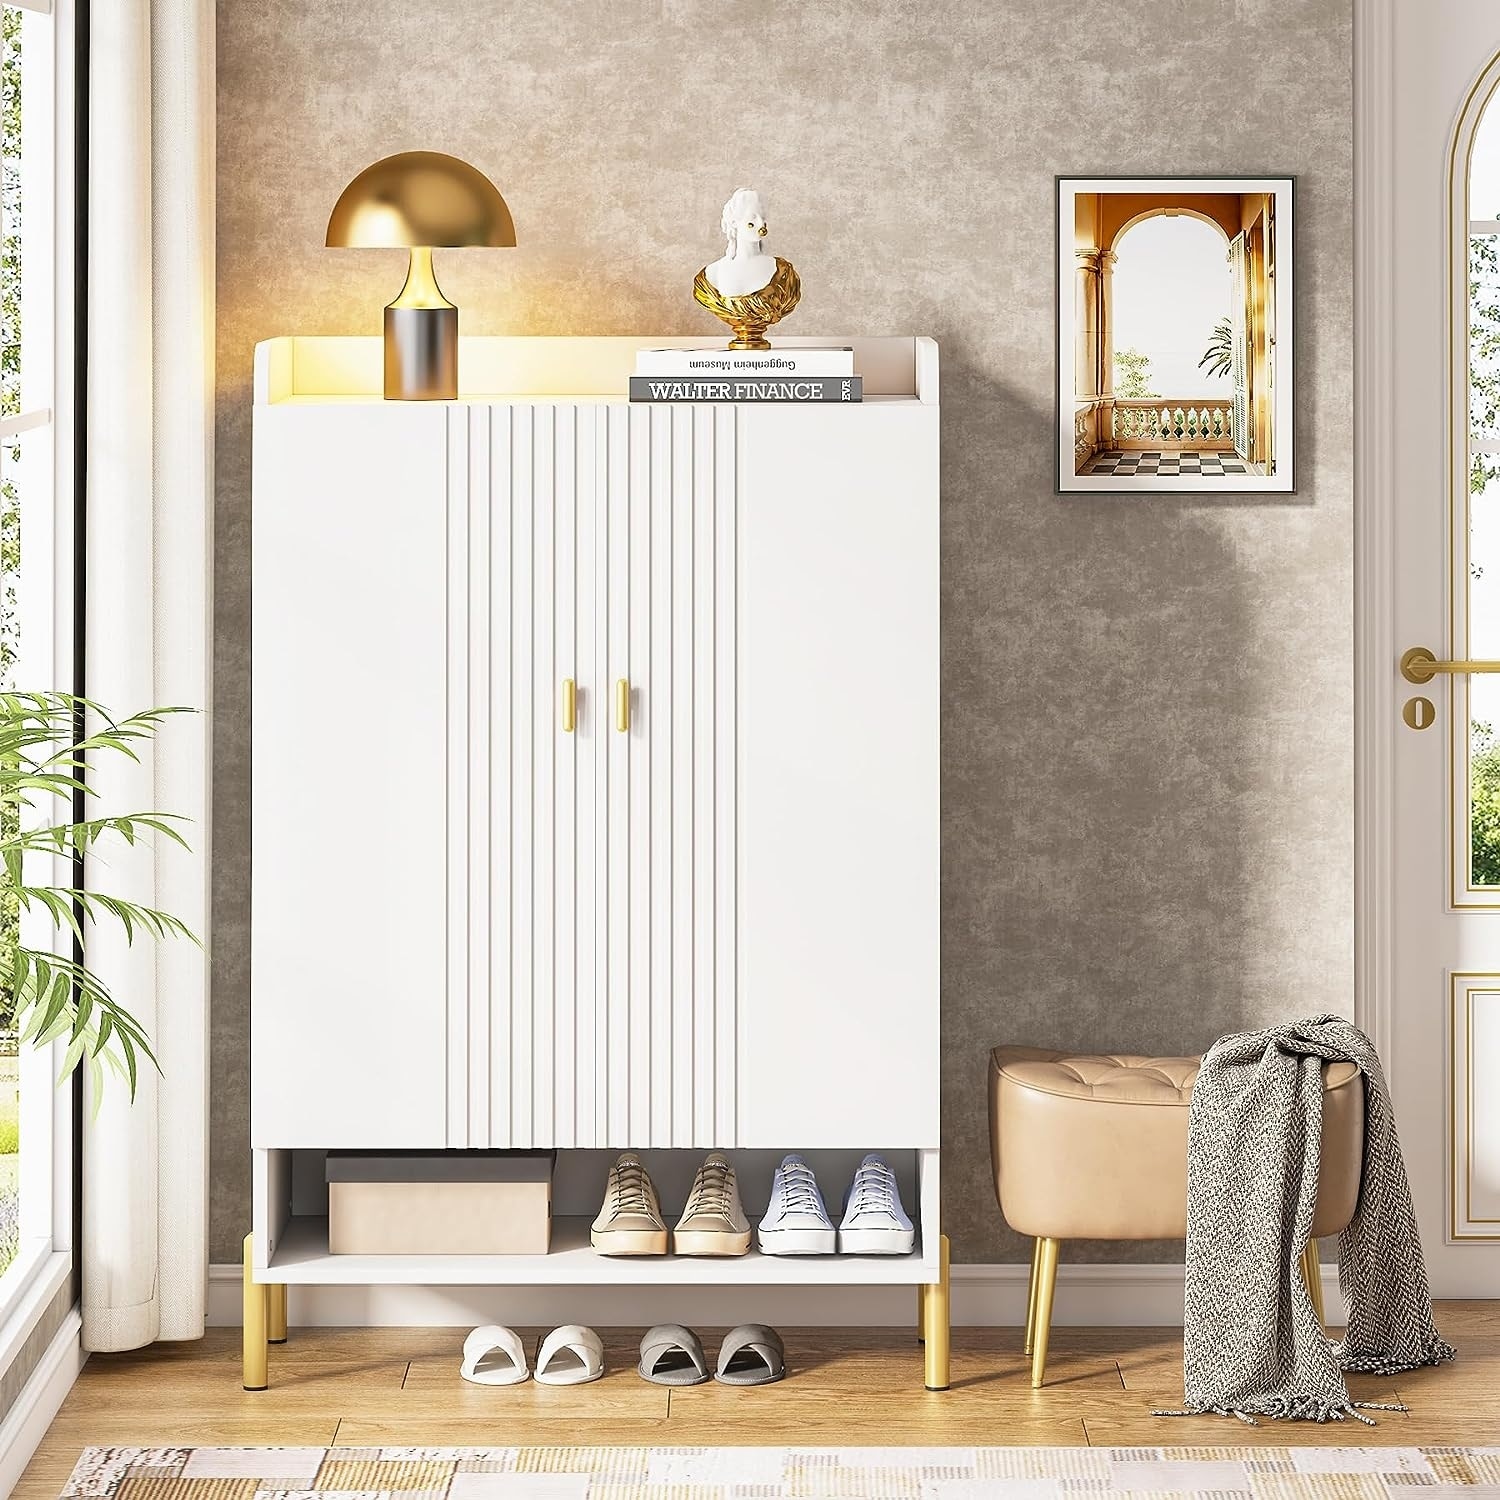 https://ak1.ostkcdn.com/images/products/is/images/direct/0be224be7726e0d4794b232e9c49b9ce5c51a7e8/6-Tier-Shoe-Cabinet-for-Entryway%2C-Modern-Slim-Shoe-Organizer-Cabinet.jpg